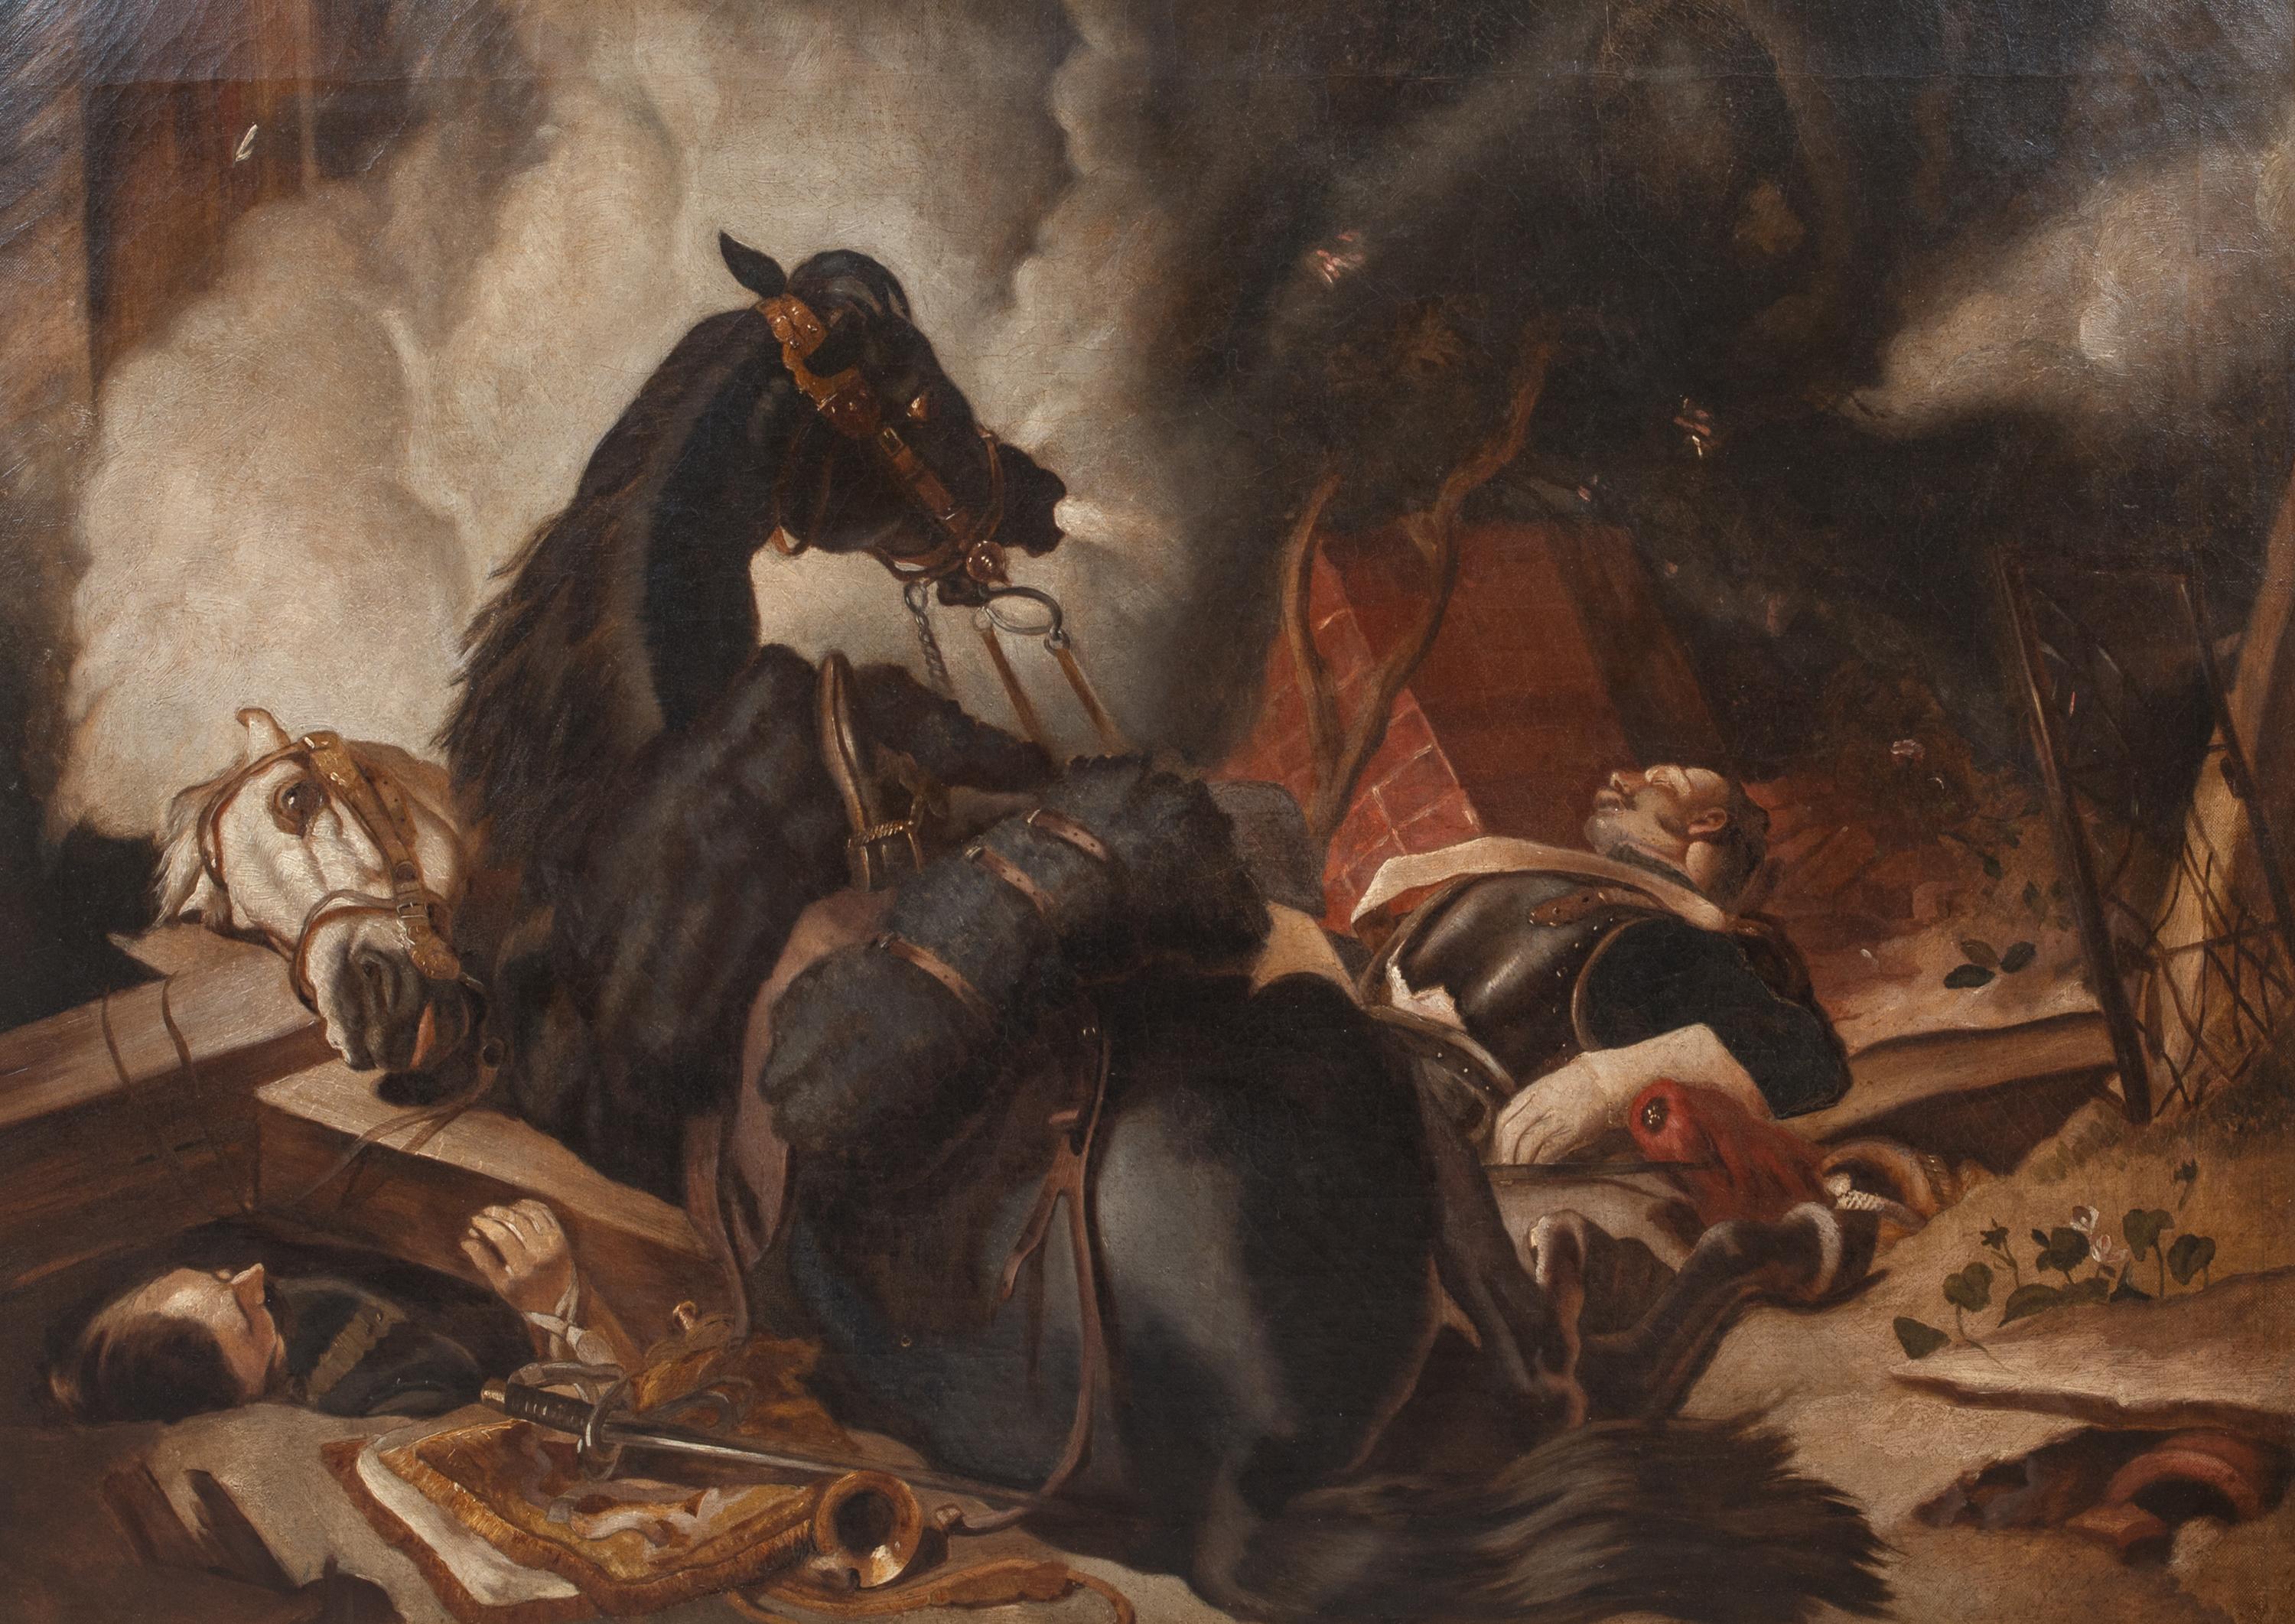 War Horse, 19th Century 

after Sir Edwin Henry Landseer (1802-1872)

Large 19th century Napoleonic Cuirassier War Horse scene, oil on canvas. Excellent quality and condition depiction of the surviving horse during battle startled at his dismounted